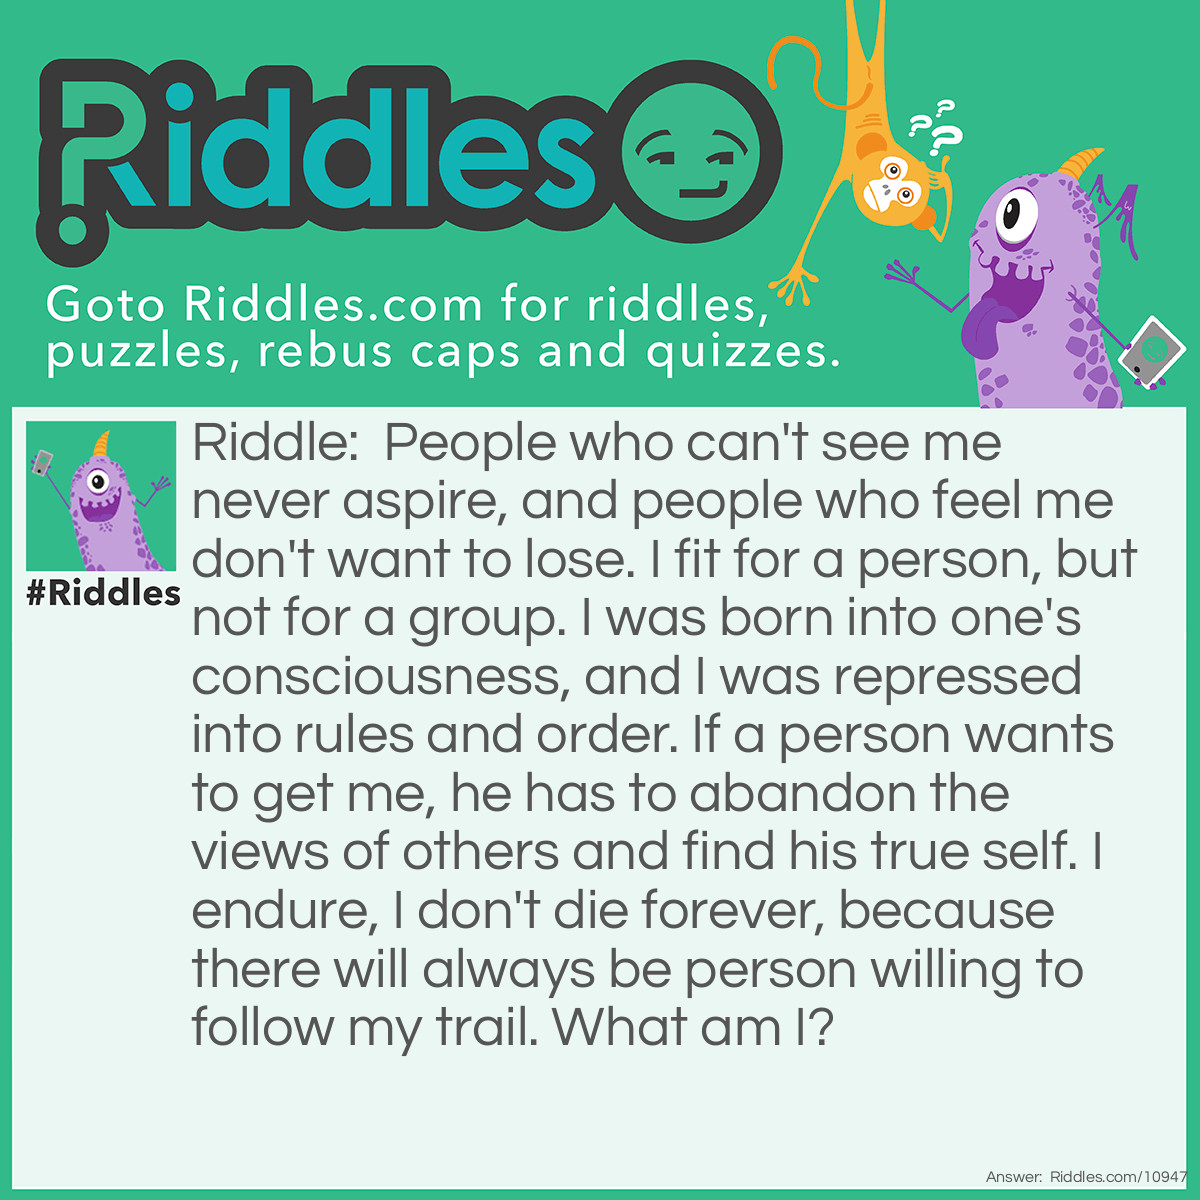 Riddle: People who can't see me never aspire, and people who feel me don't want to lose. I fit for a person, but not for a group. I was born into one's consciousness, and I was repressed into rules and order. If a person wants to get me, he has to abandon the views of others and find his true self. I endure, I don't die forever, because there will always be person willing to follow my trail. What am I? Answer: Freedom.